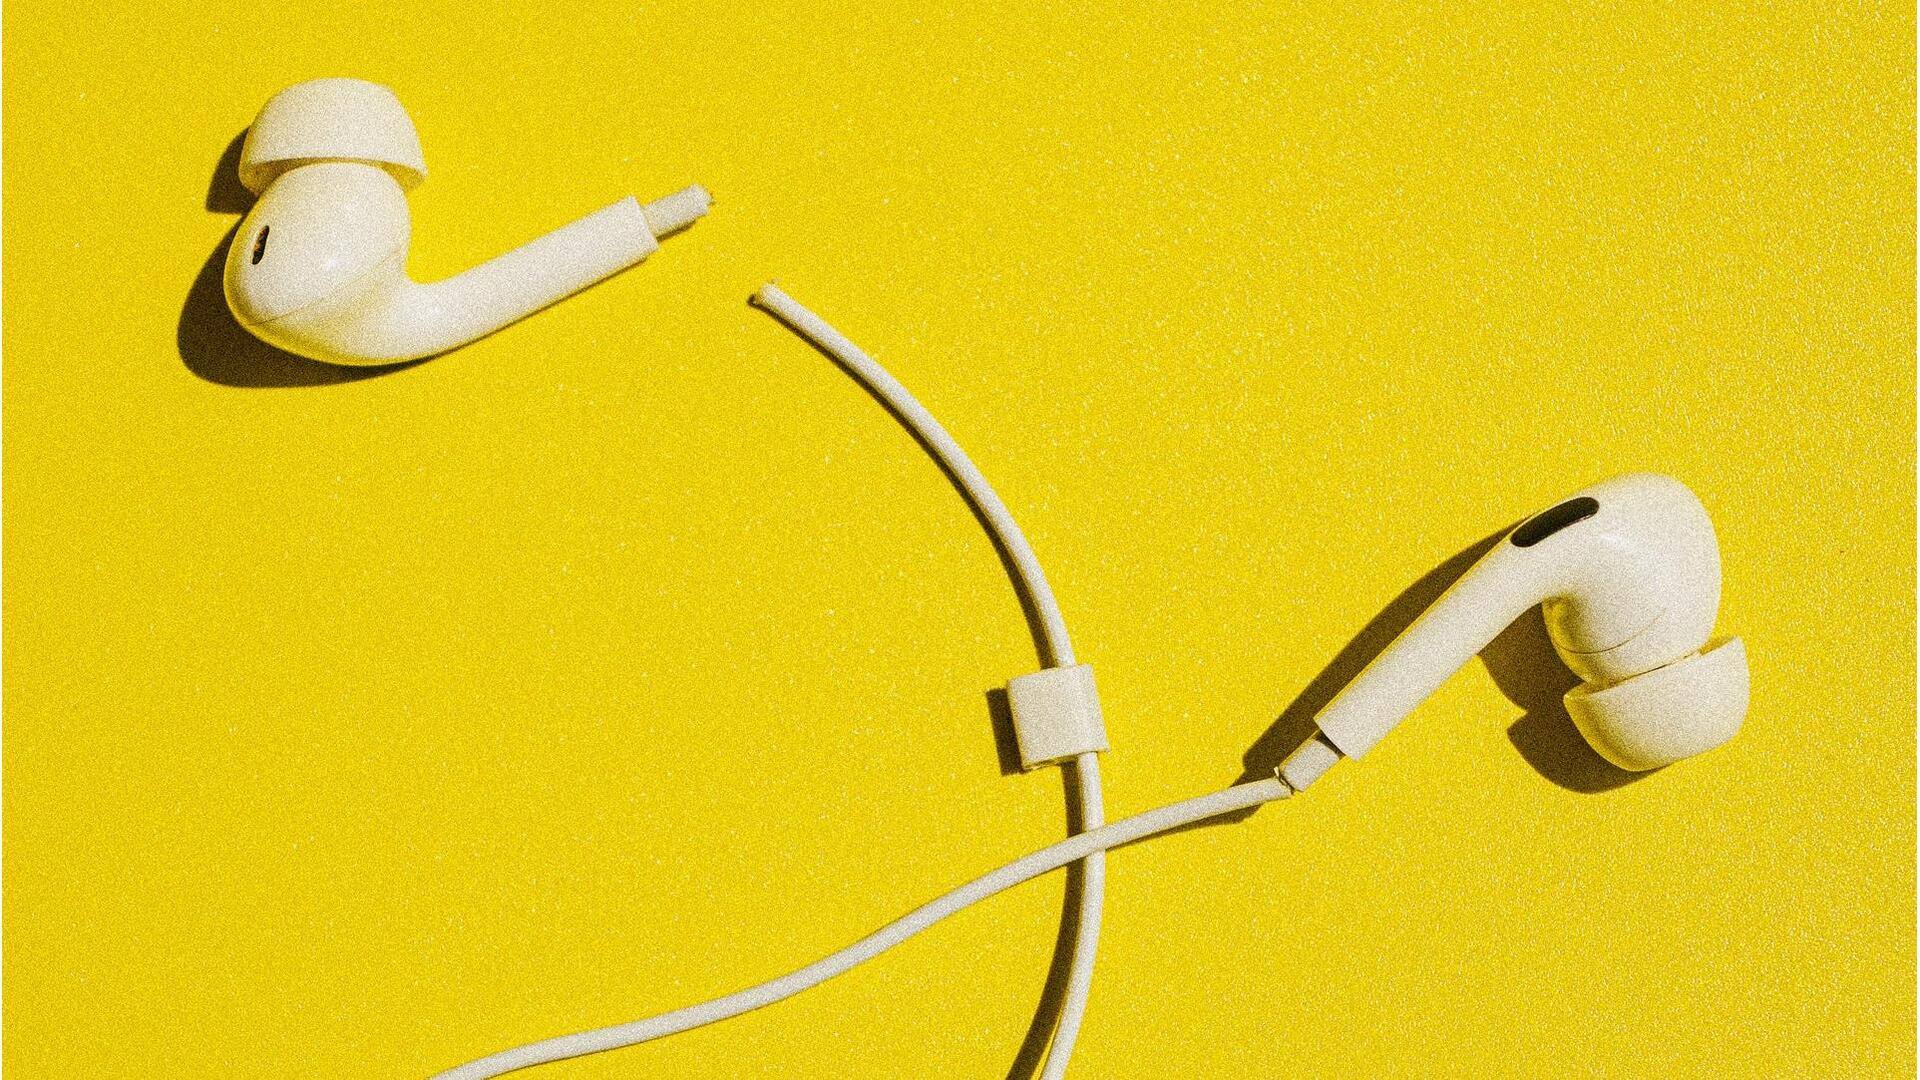 Your budget wired earbuds for iPhones are actually wireless